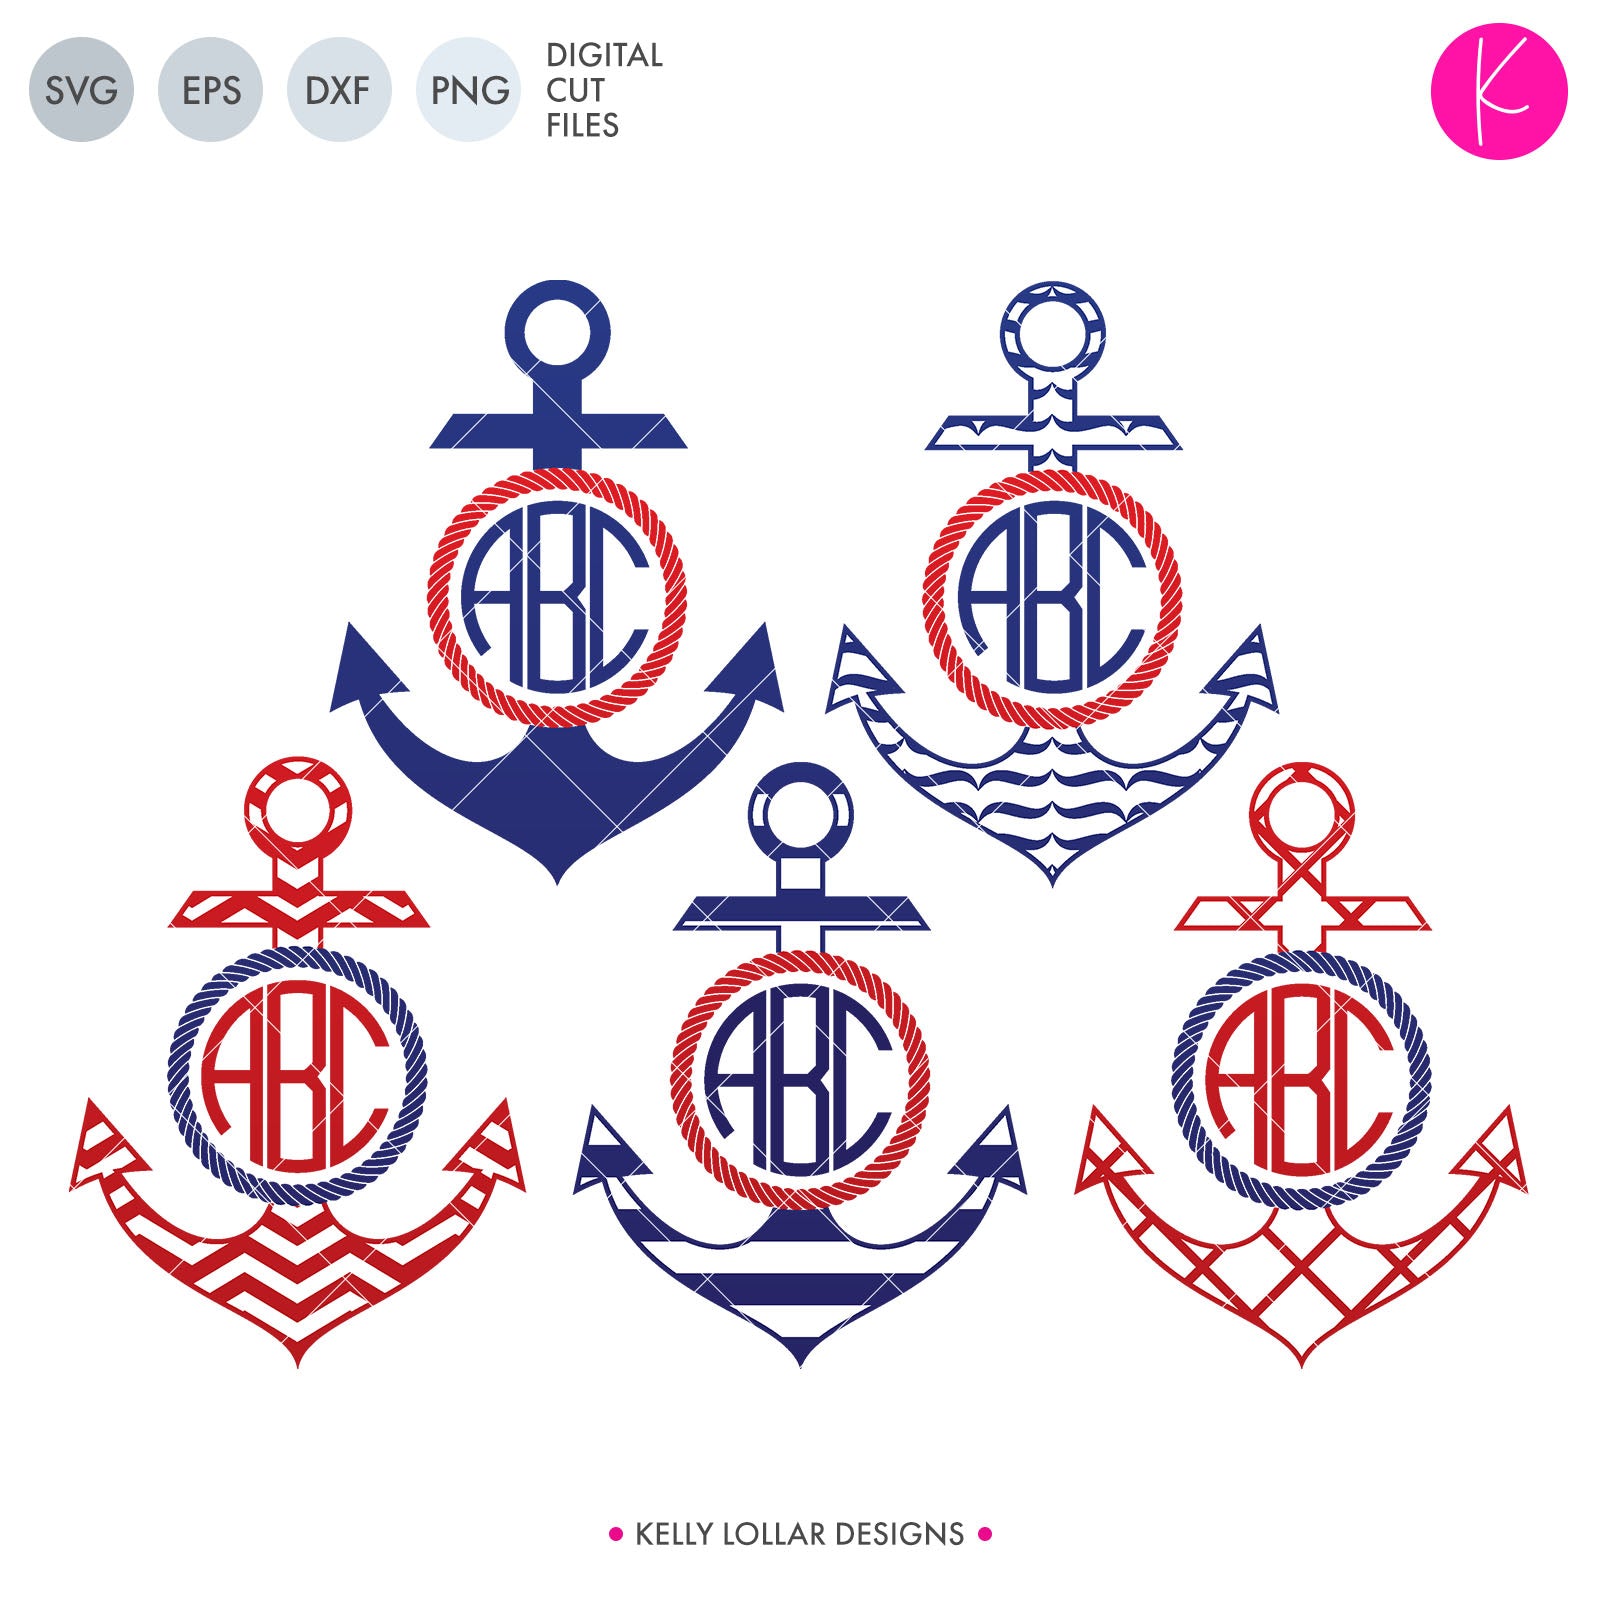 Download Monogram Svg Dxf Eps Png Cut Files Kelly Lollar Designs Tagged Summer